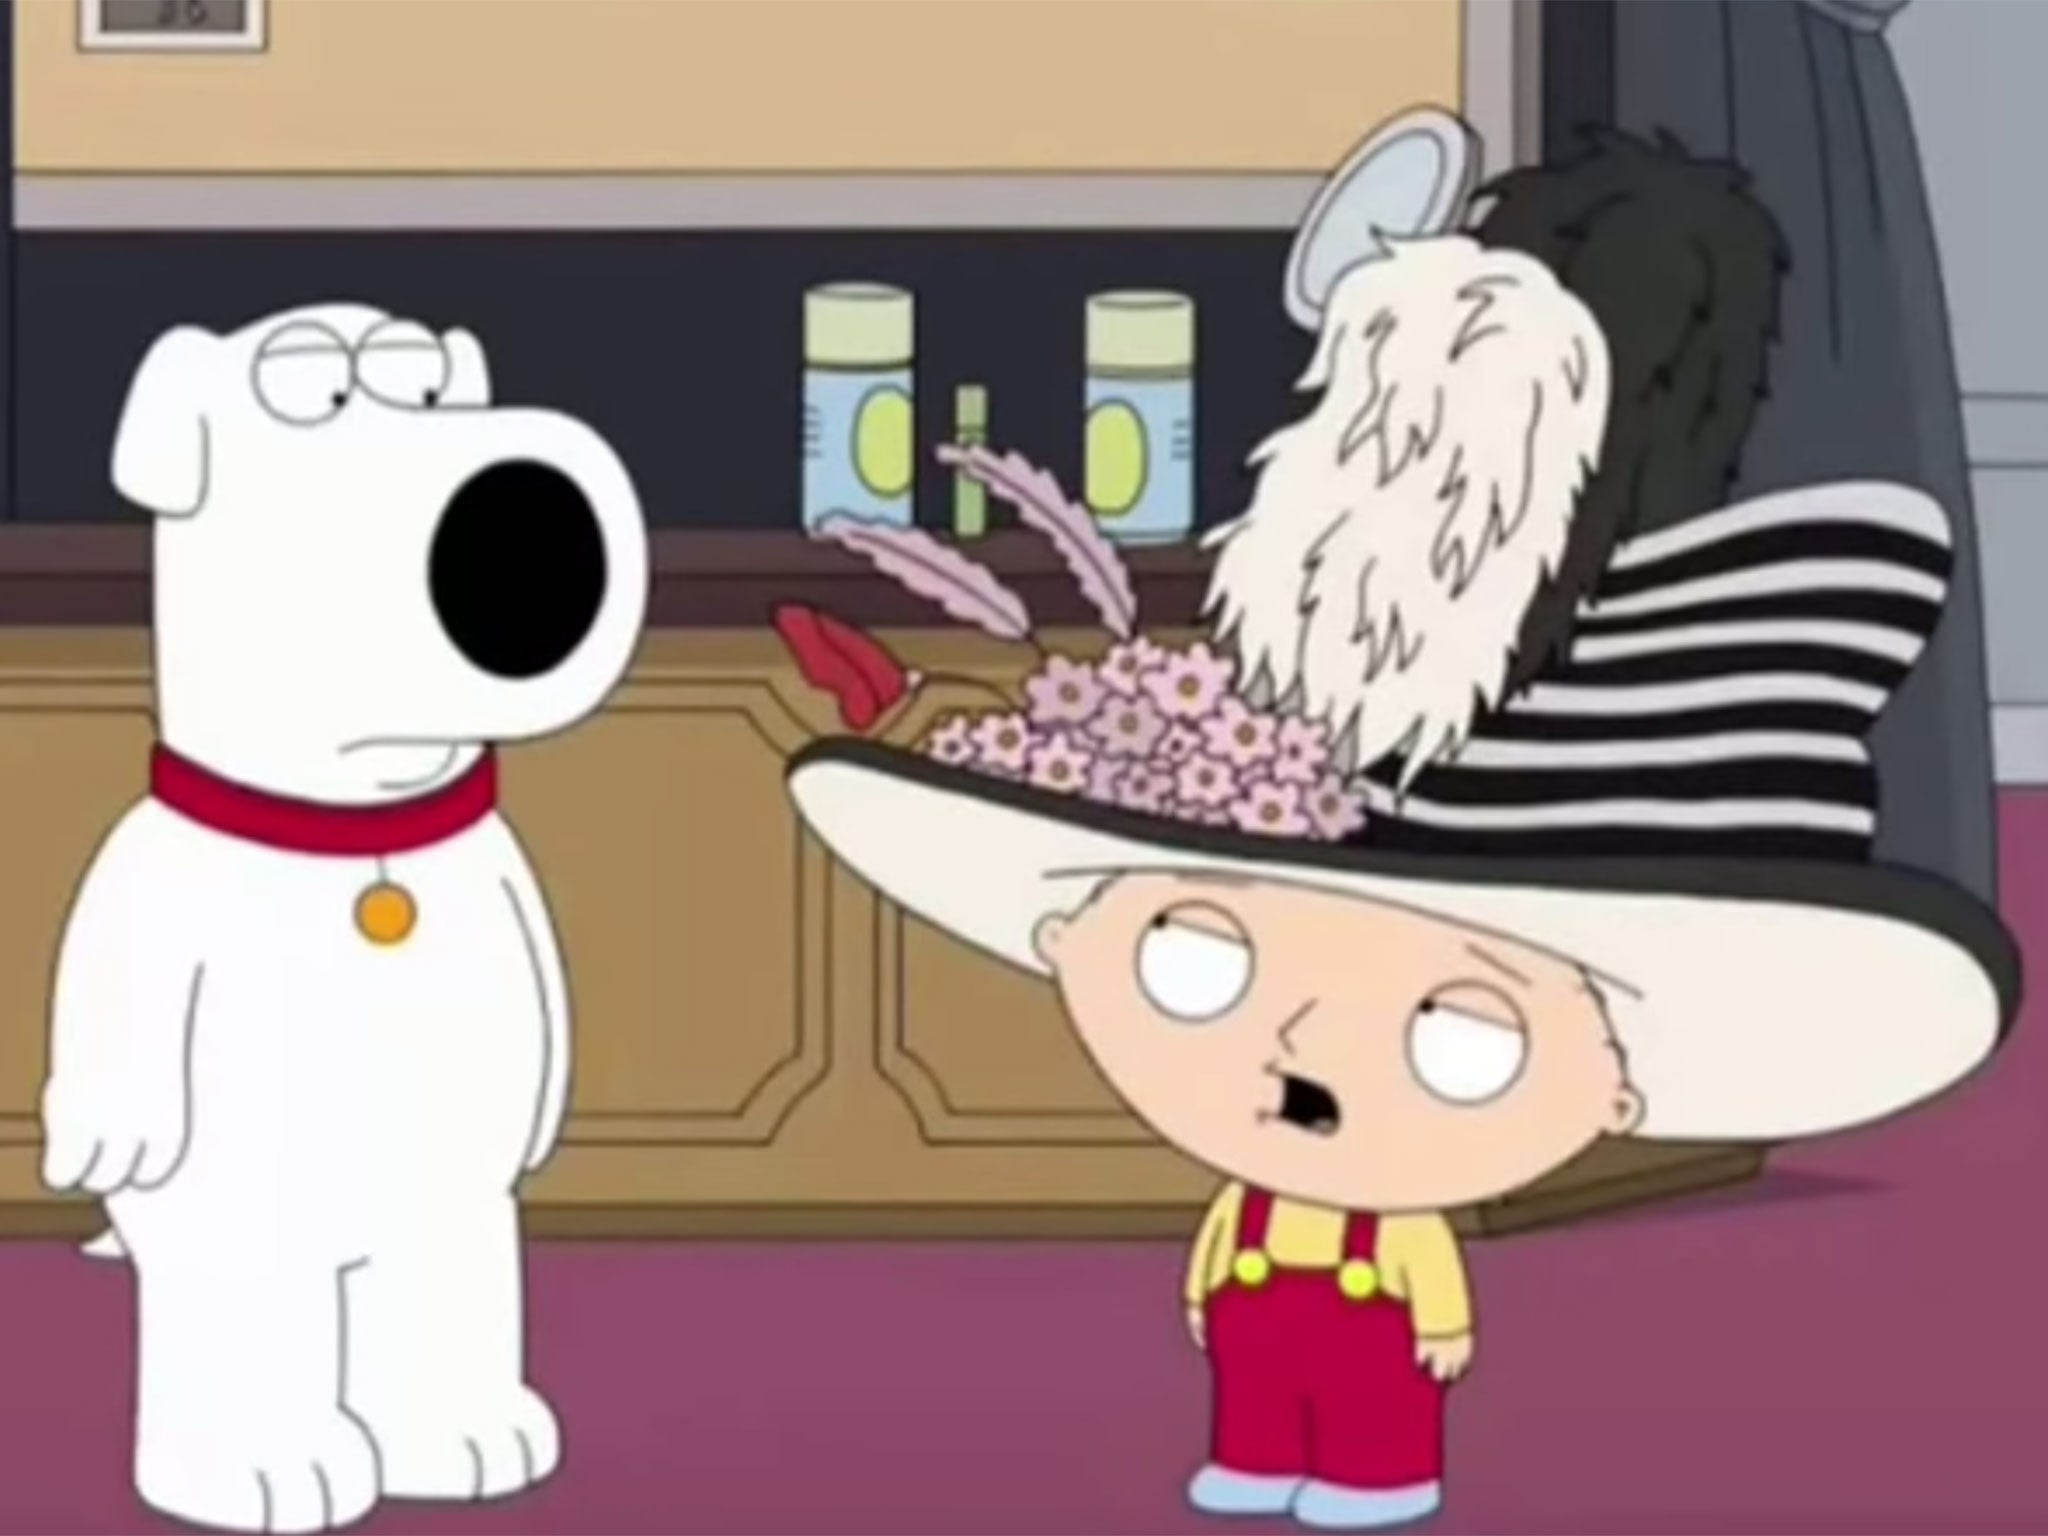 Stewie argues that Caitlyn Jenner is a woman six years before she transitioned